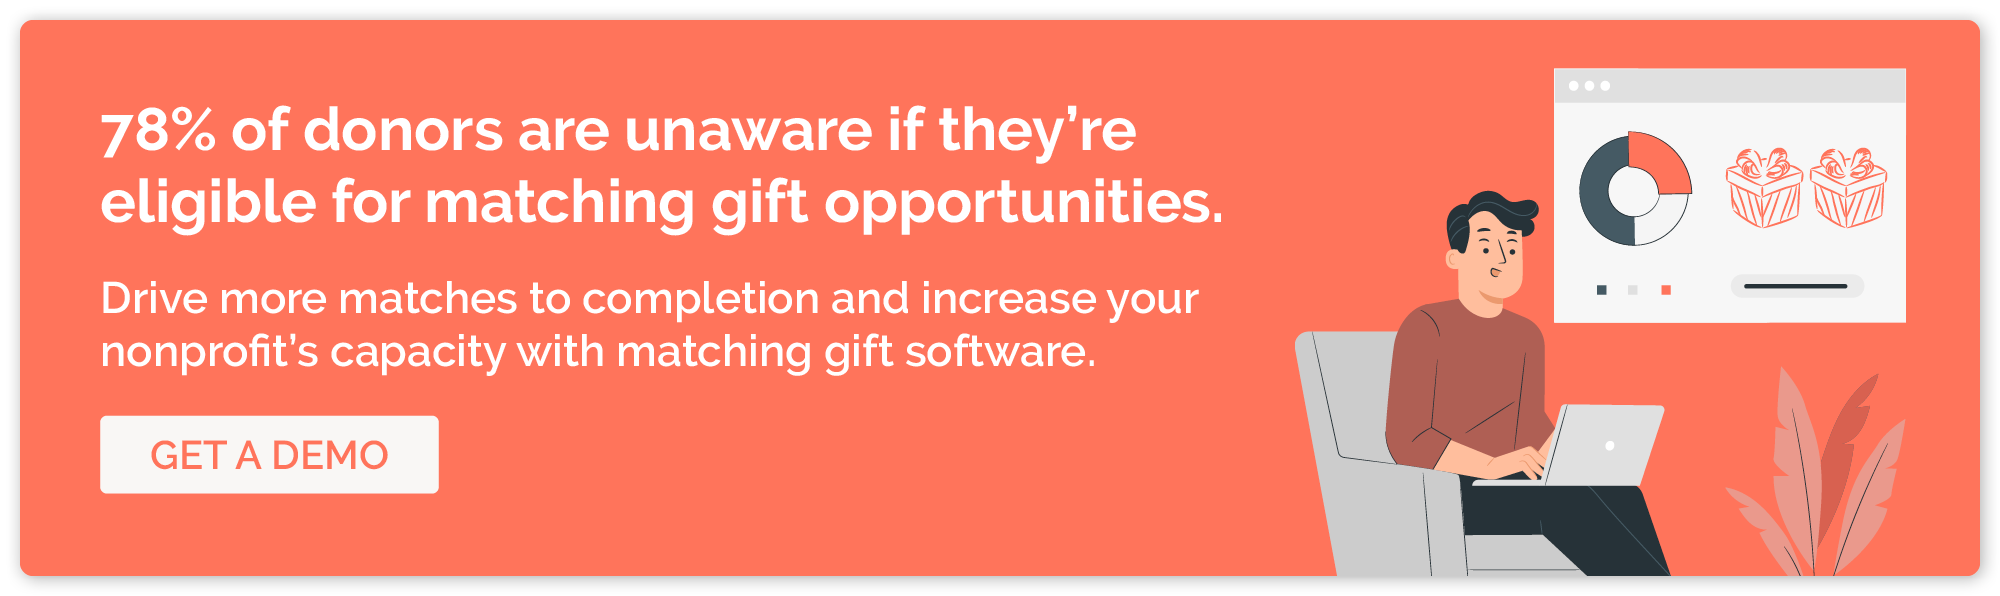 Start increasing your nonprofit's capacity with matching gift software. Get a demo today.